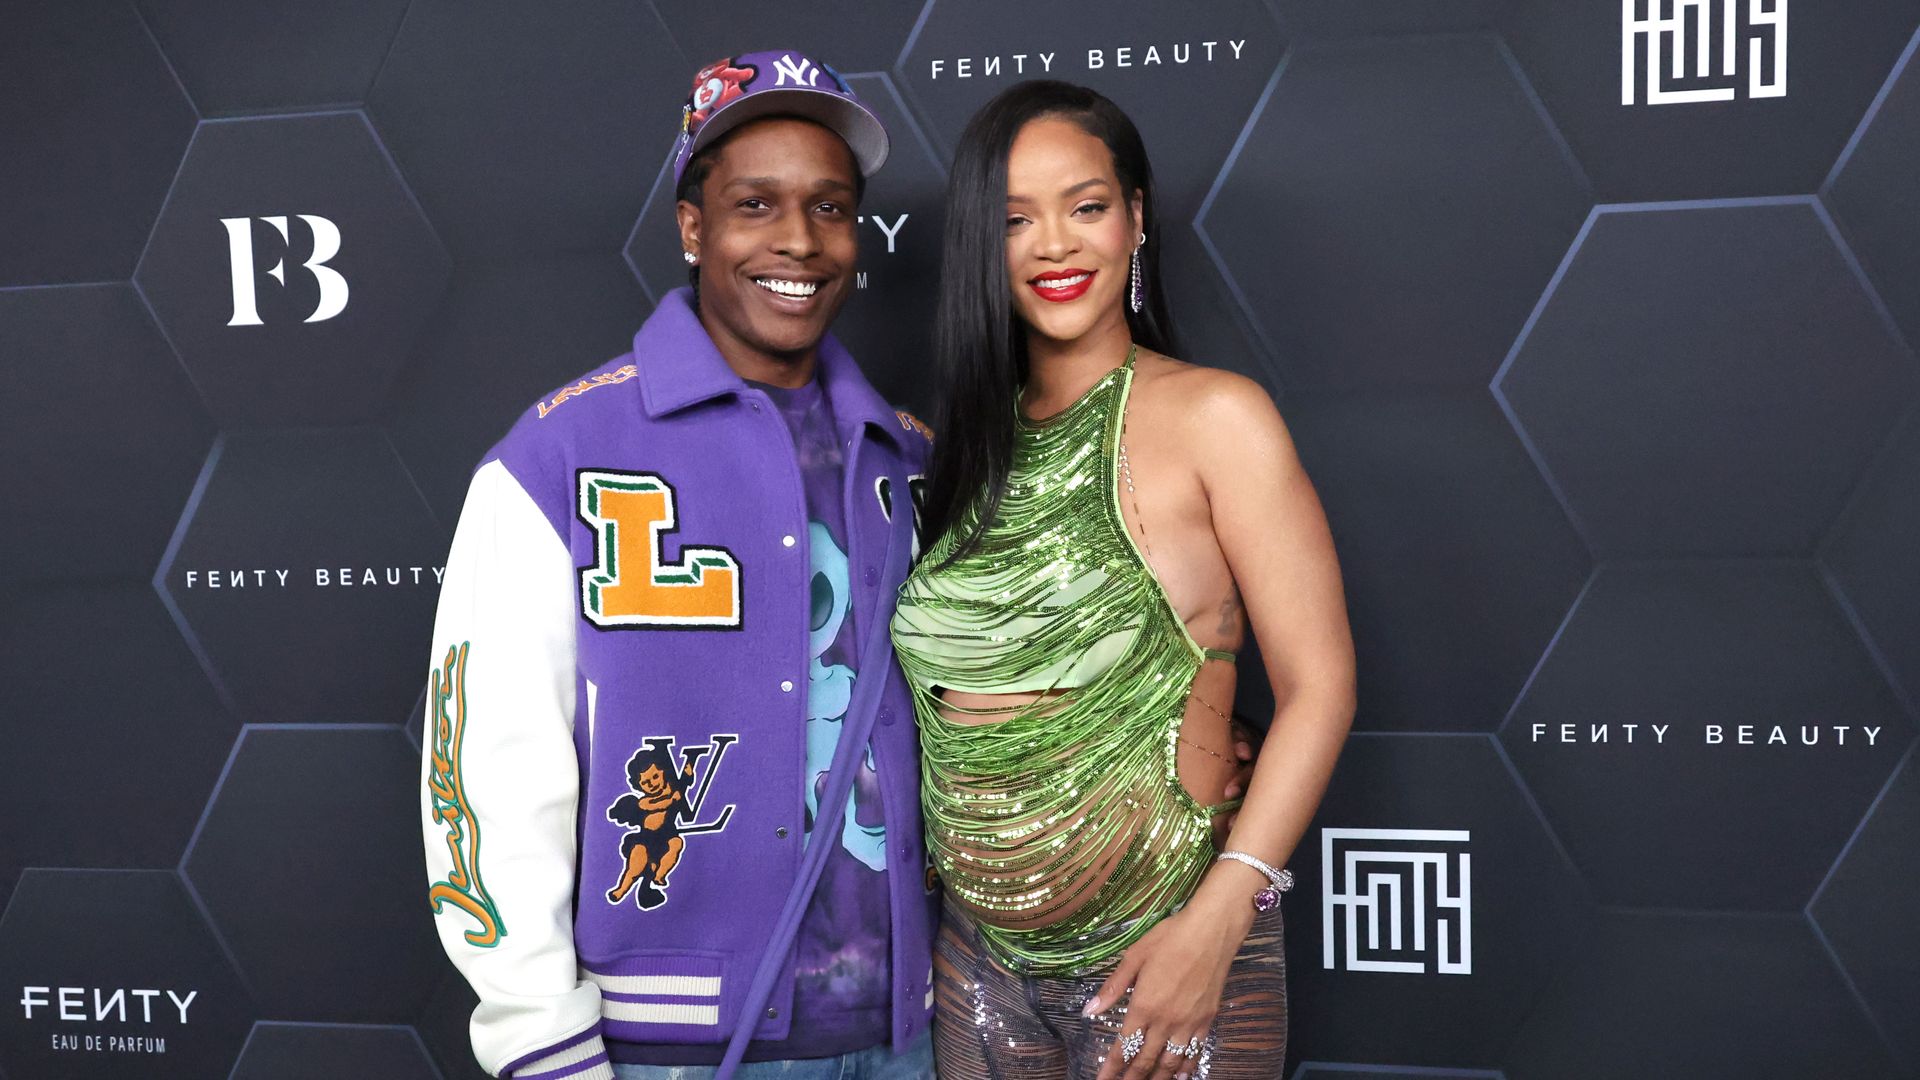 A$AP Rocky Just Took This Biggest Style Risk Yet